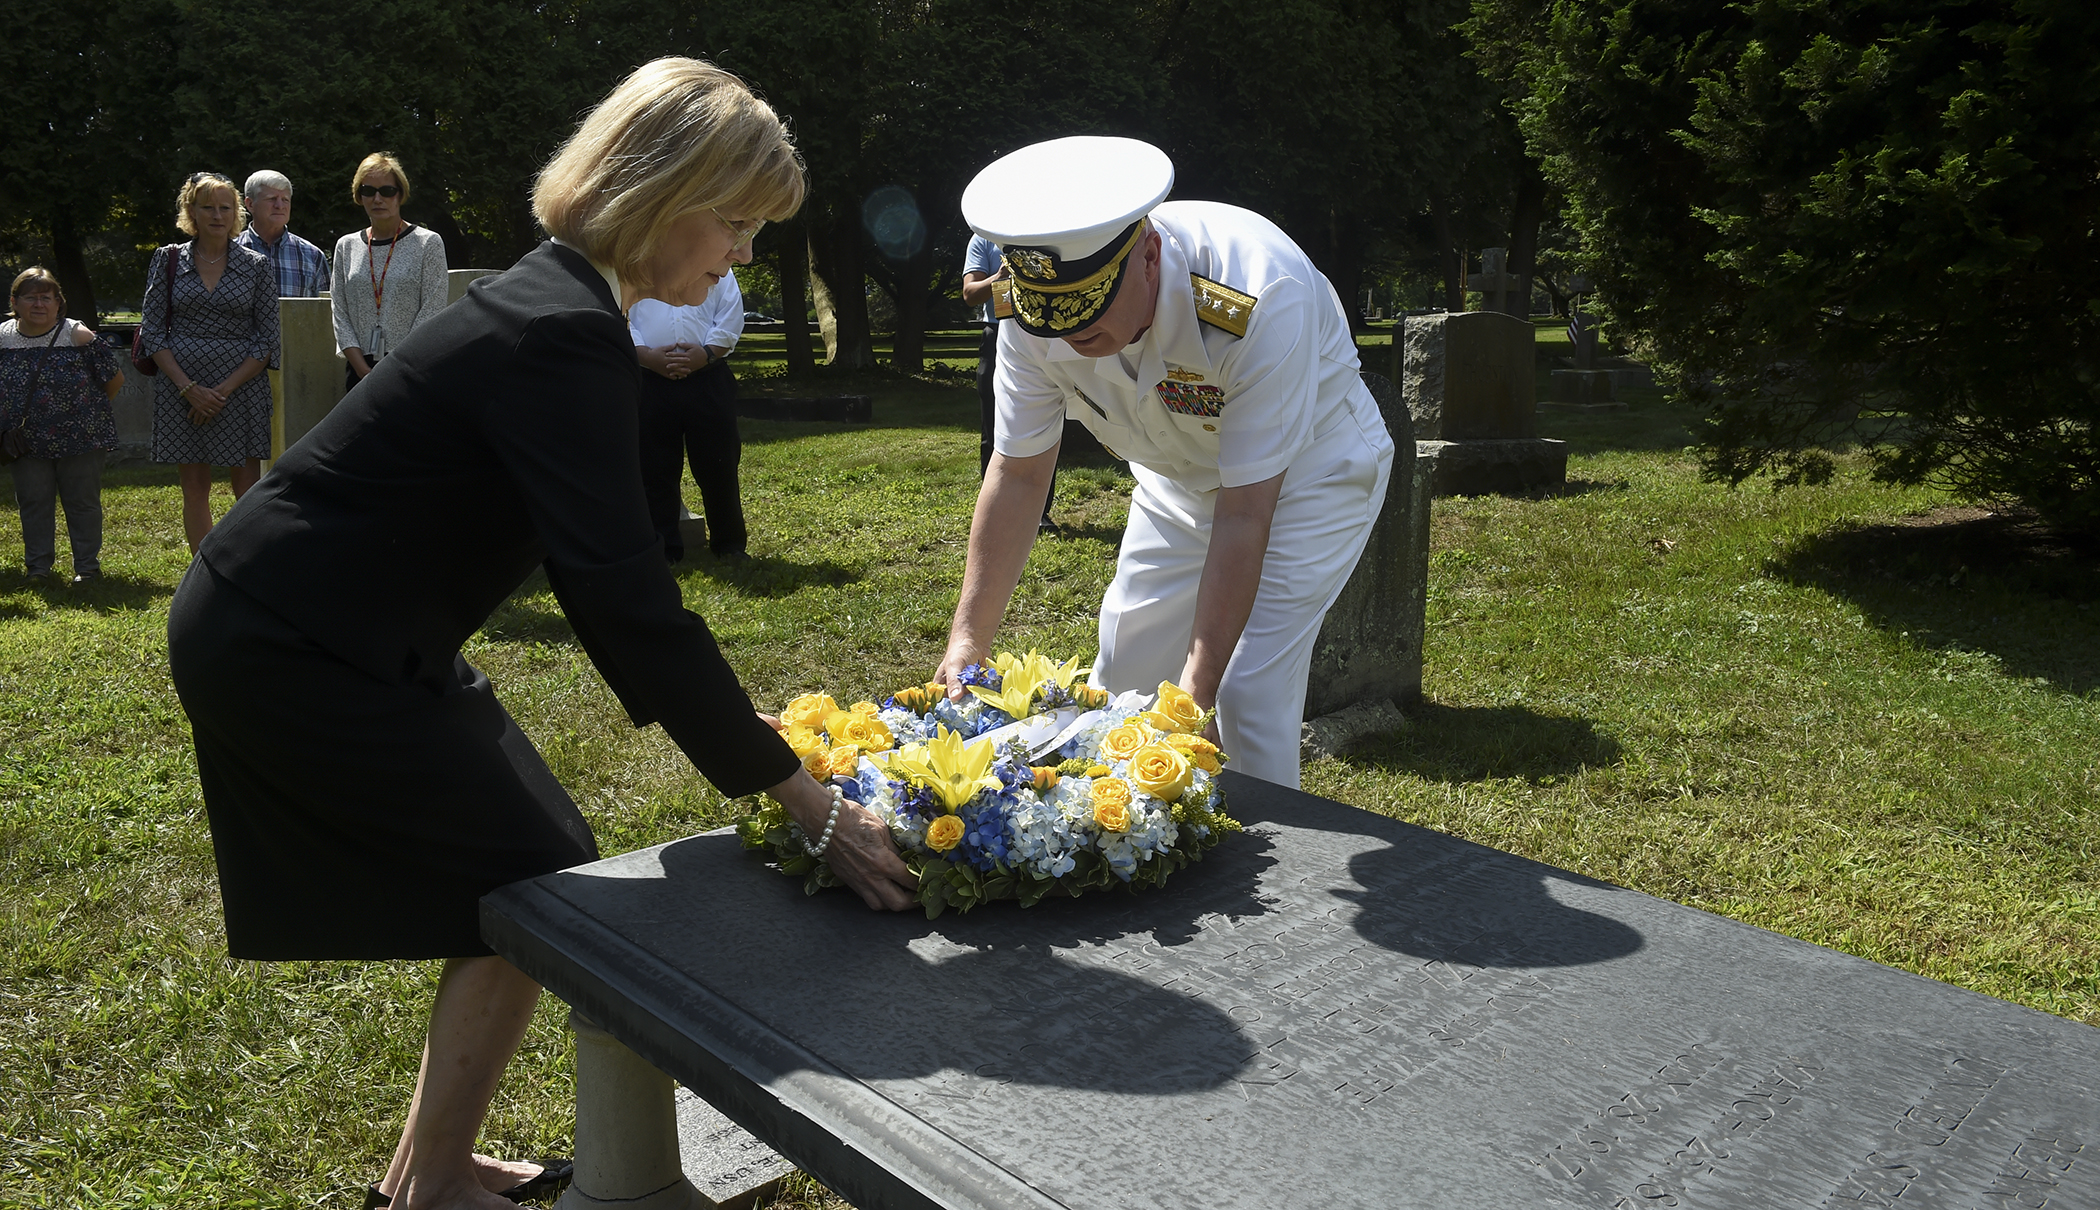 Anne Dubose Joslin, great, great grandniece of Rear Adm. Stephen B. Luce, and Rear Adm. Jeffrey A. Harley, president, U.S. Naval War College (NWC), place a wreath donated on Luce’s gravestone during a during a commemoration ceremony at St. Mary’s Episcopal Church Cemetery to mark the 100th anniversary of Luce’s death. Luce was the founder of NWC and served as its president from Oct. 6, 1884 until June 22, 1888. 